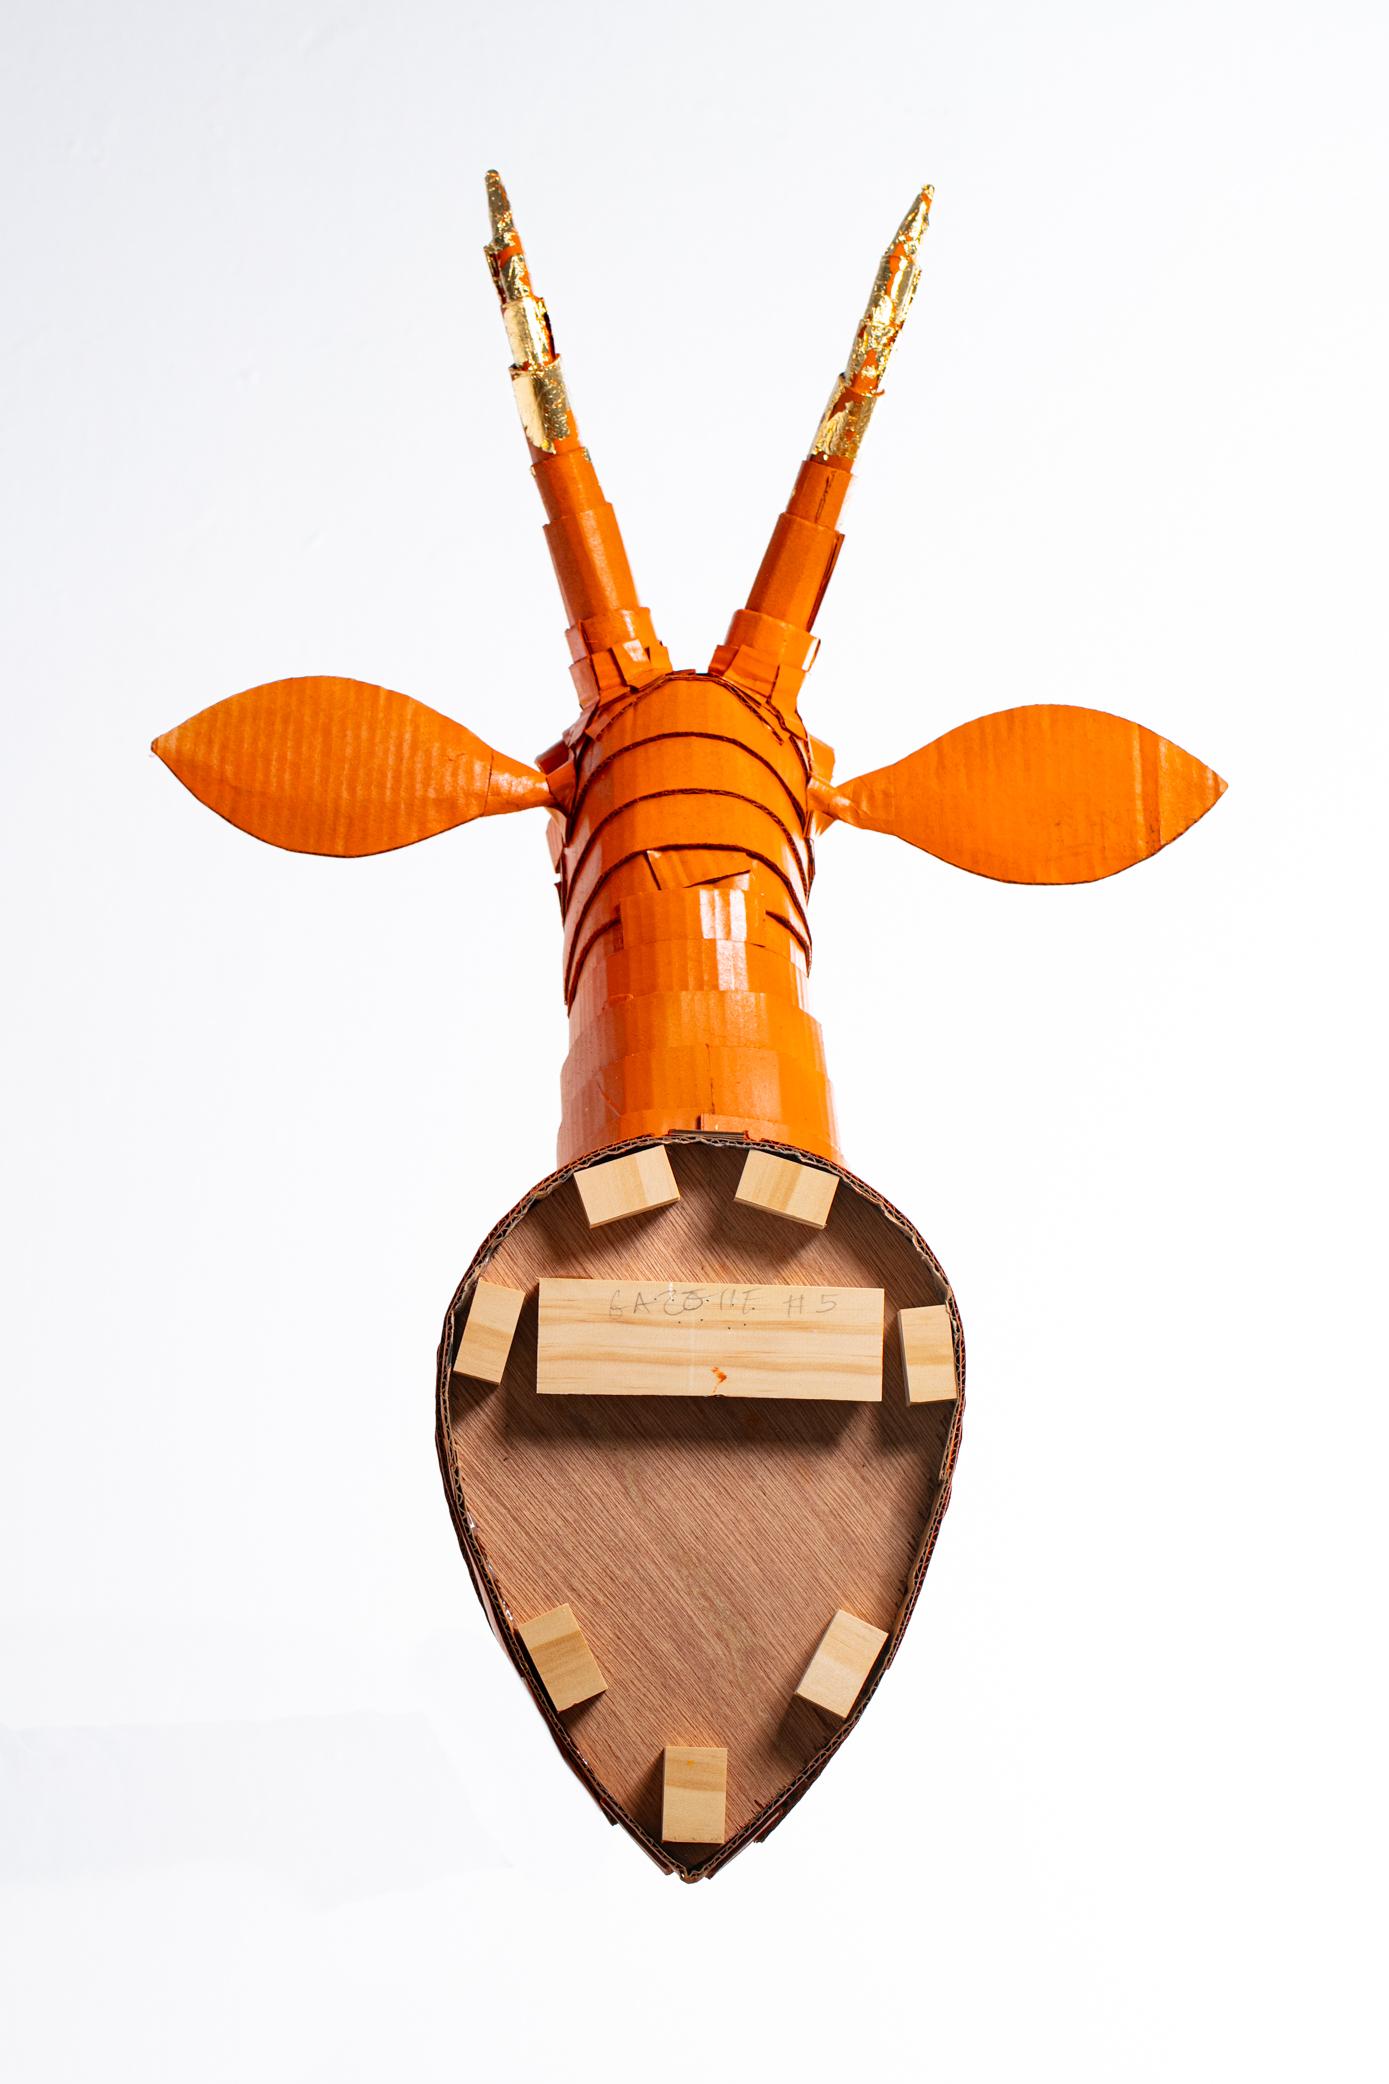 Gazelle #5 in Persimmon Orange with Gold Leaf Horn Detail For Sale 1